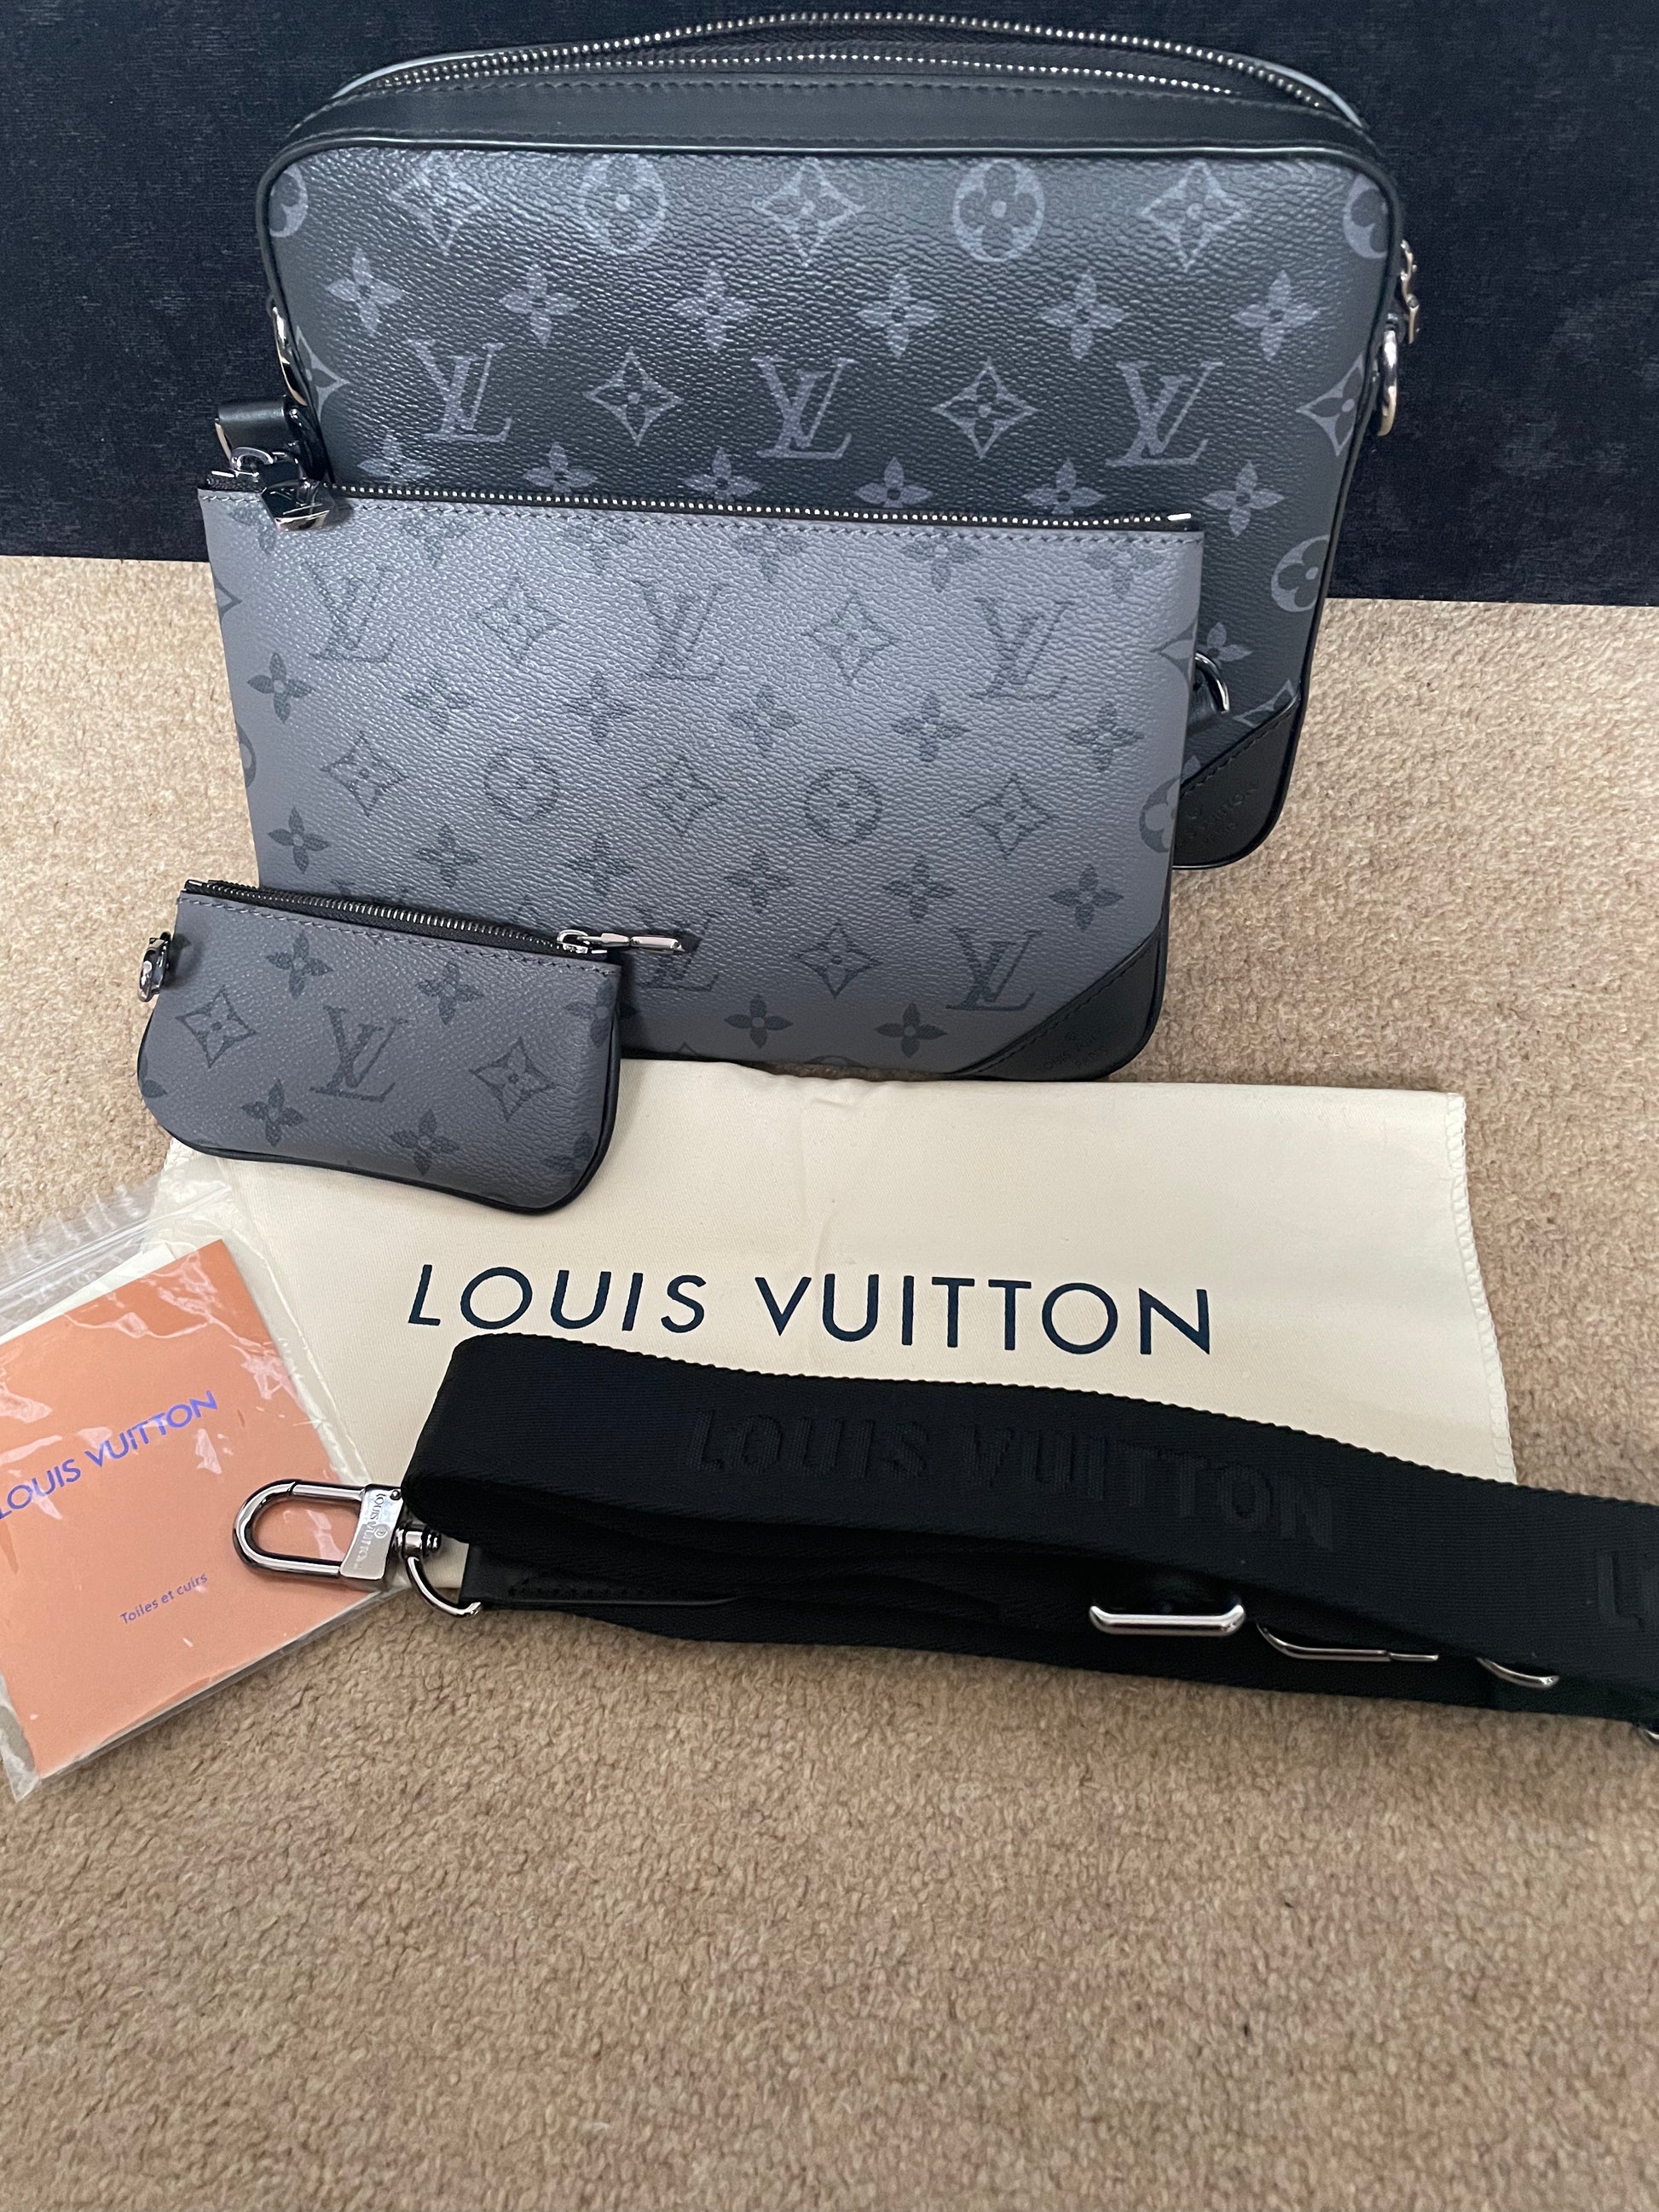 LV Trio messenger bag pictures and prices